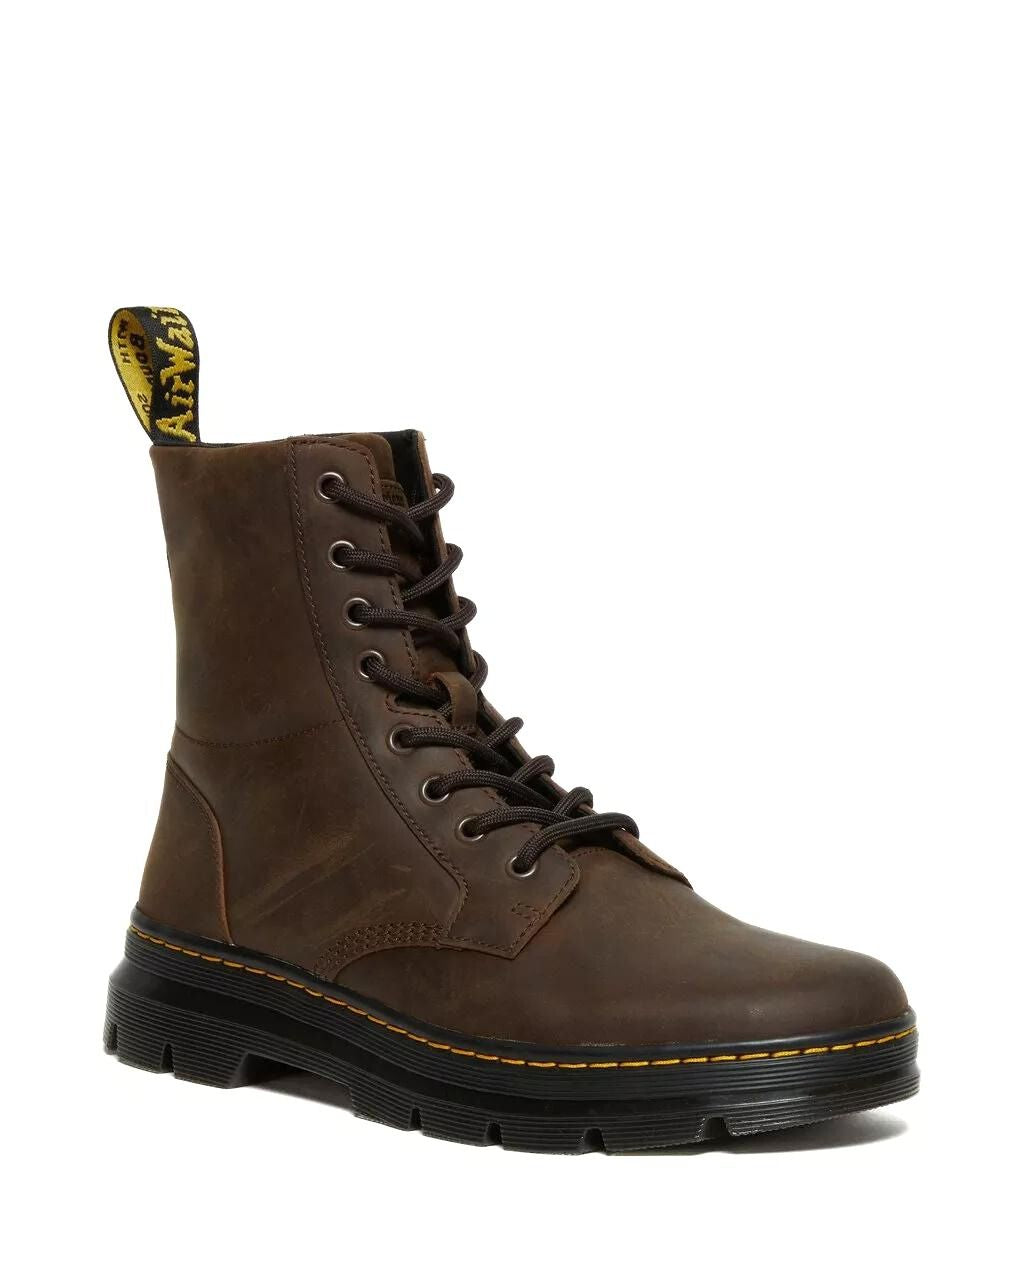 Dr Martens Combs Leather Gauch Crazy Horse Boot